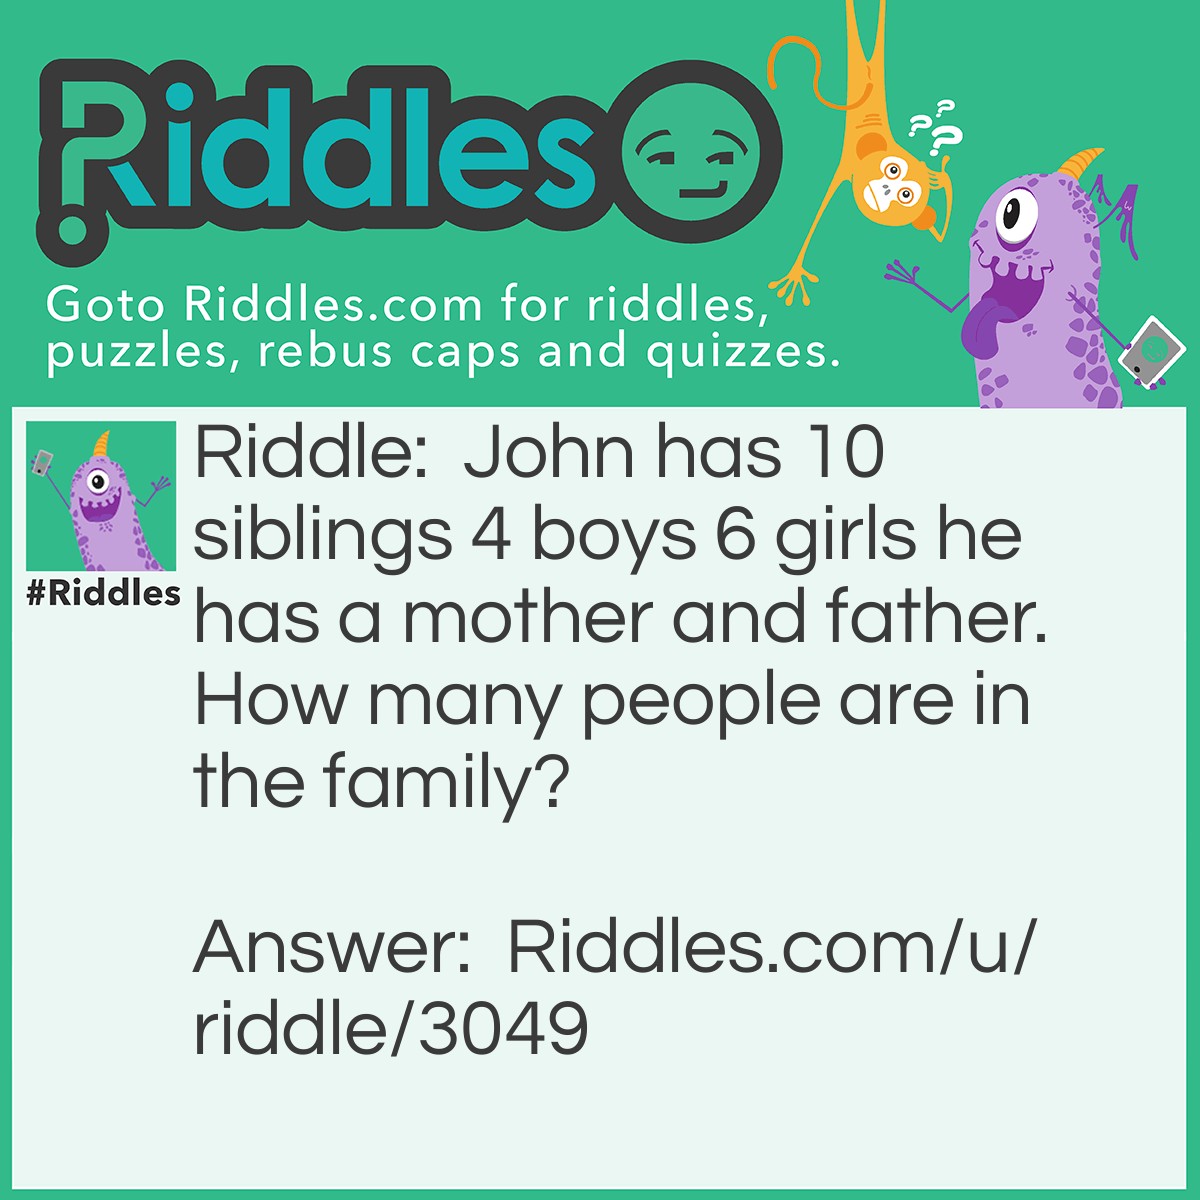 Riddle: John has 10 siblings 4 boys and 6 girls he has a mother and father. How many people are in the family? Answer: 13 people are in the family John+his 10 siblings+his mom and dad.